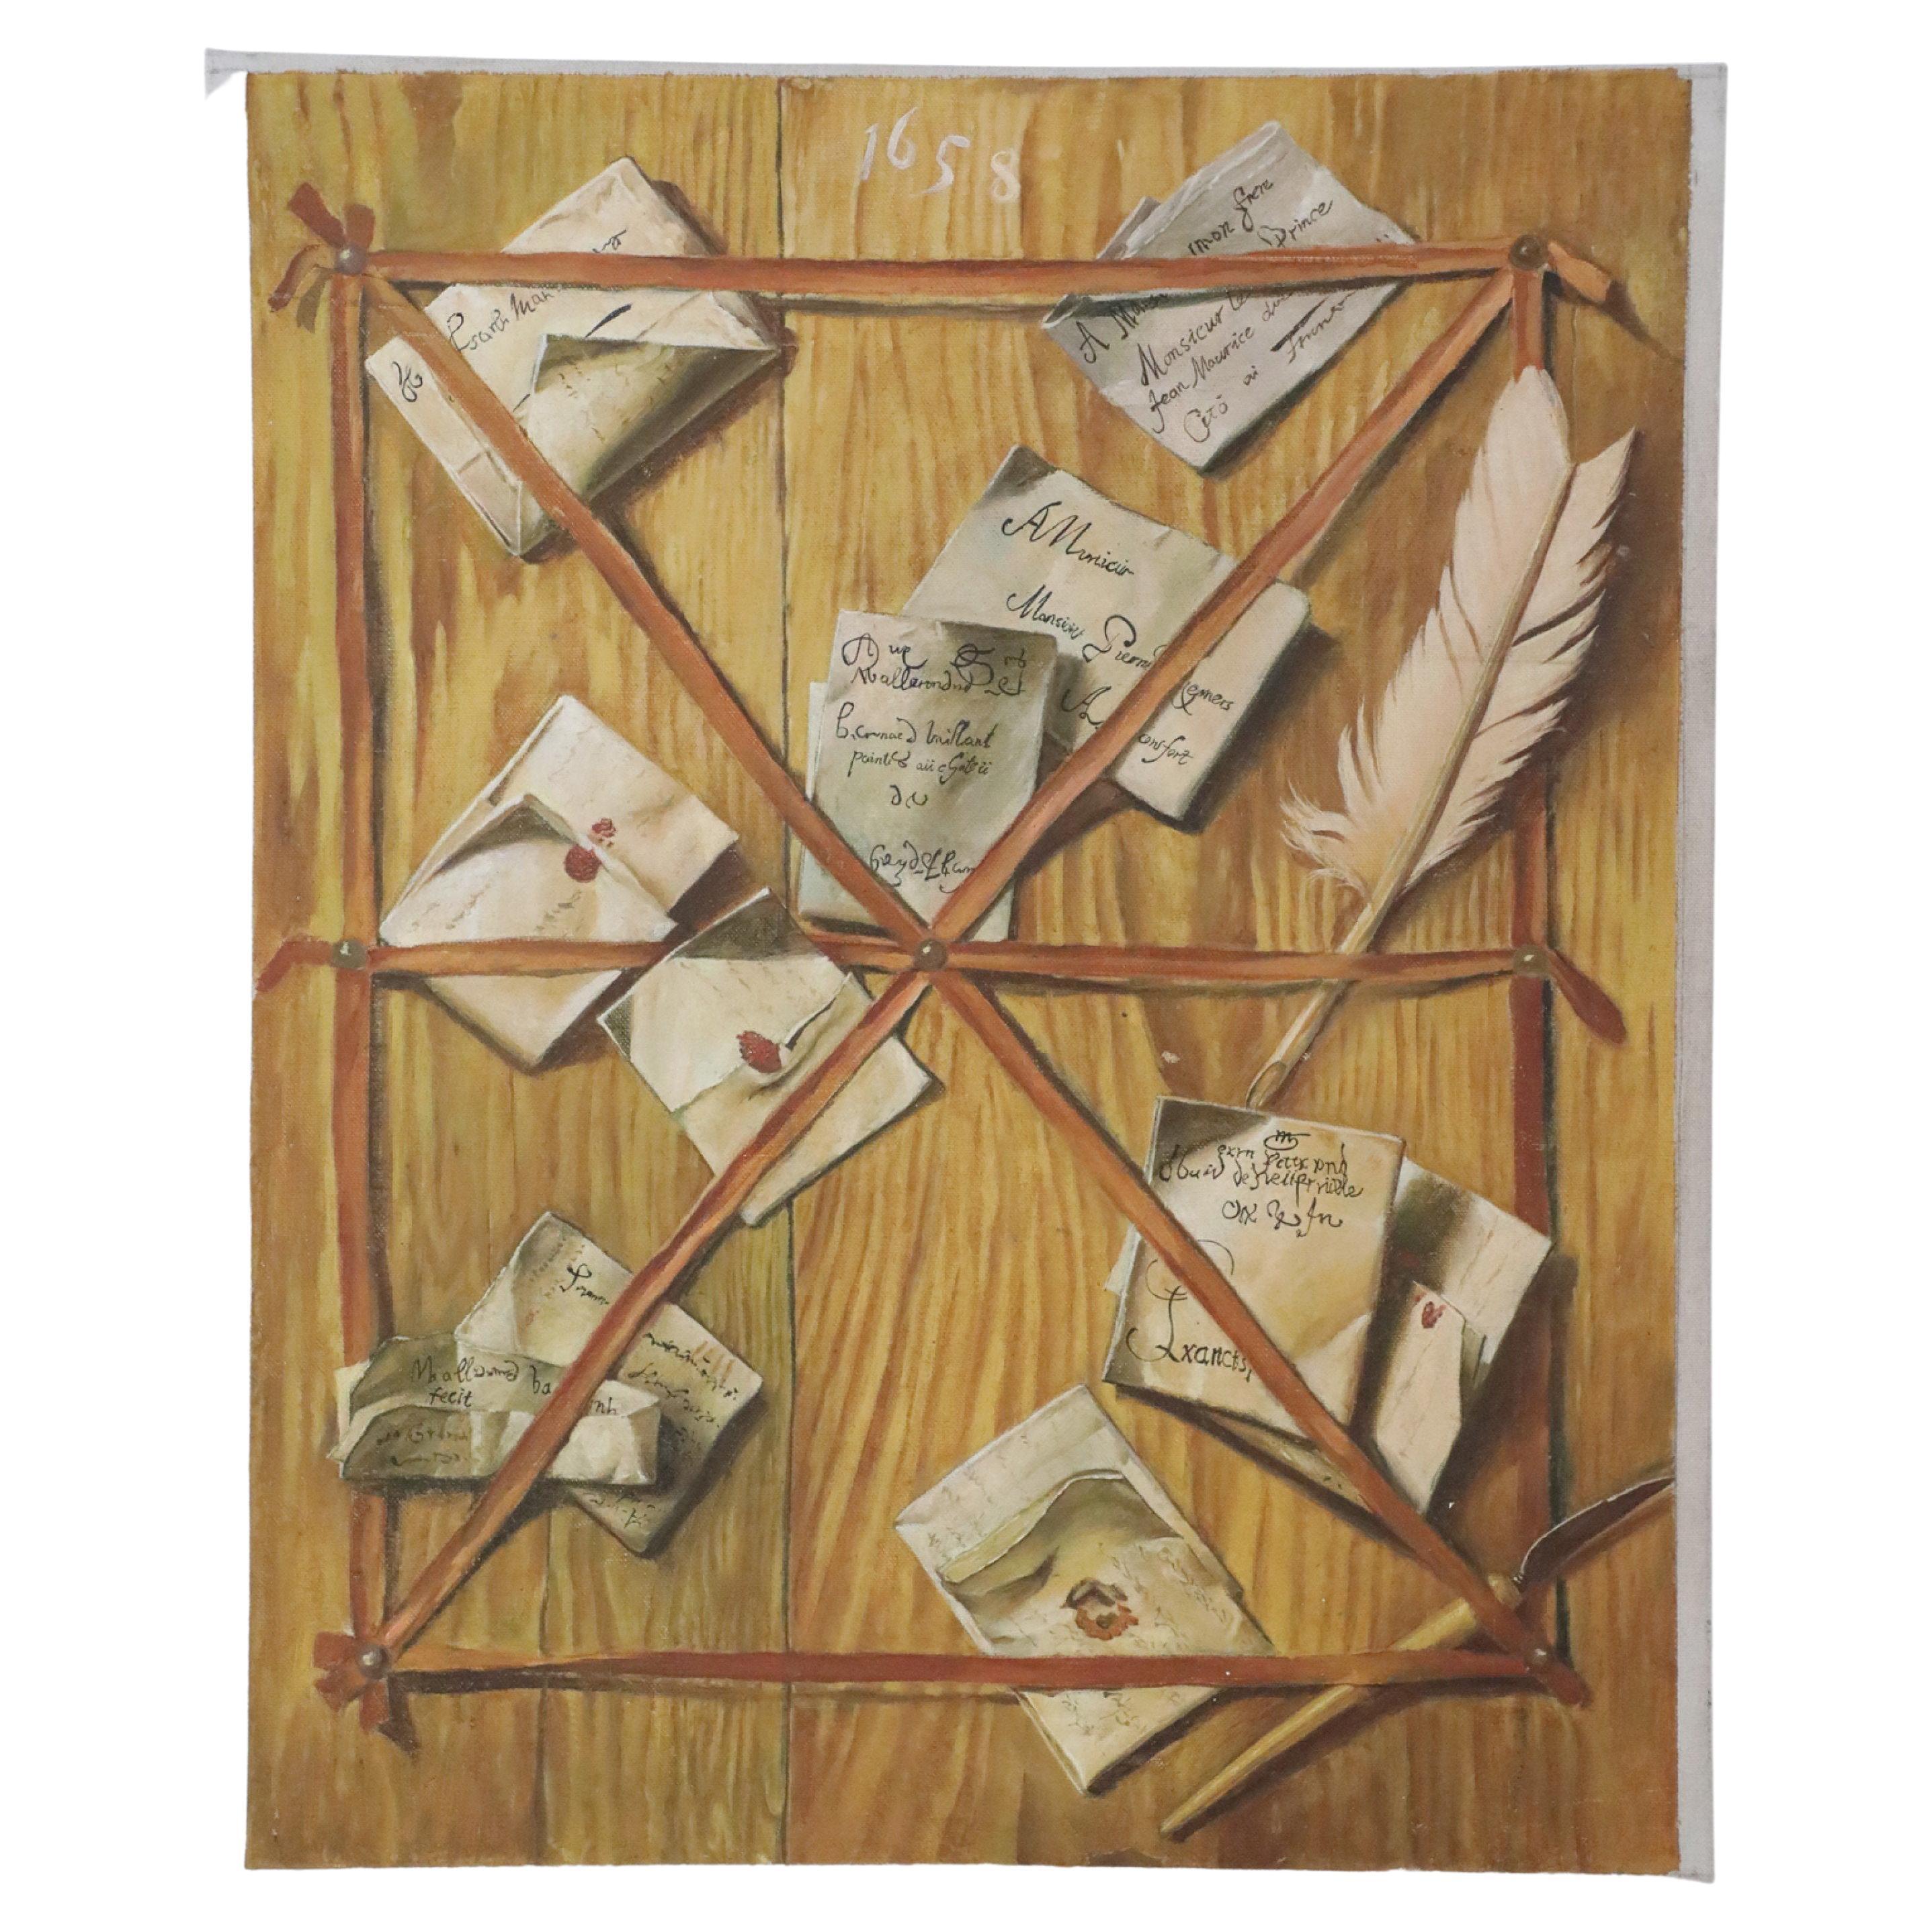 Trompe l'oeil Still Life Painting of Letters For Sale